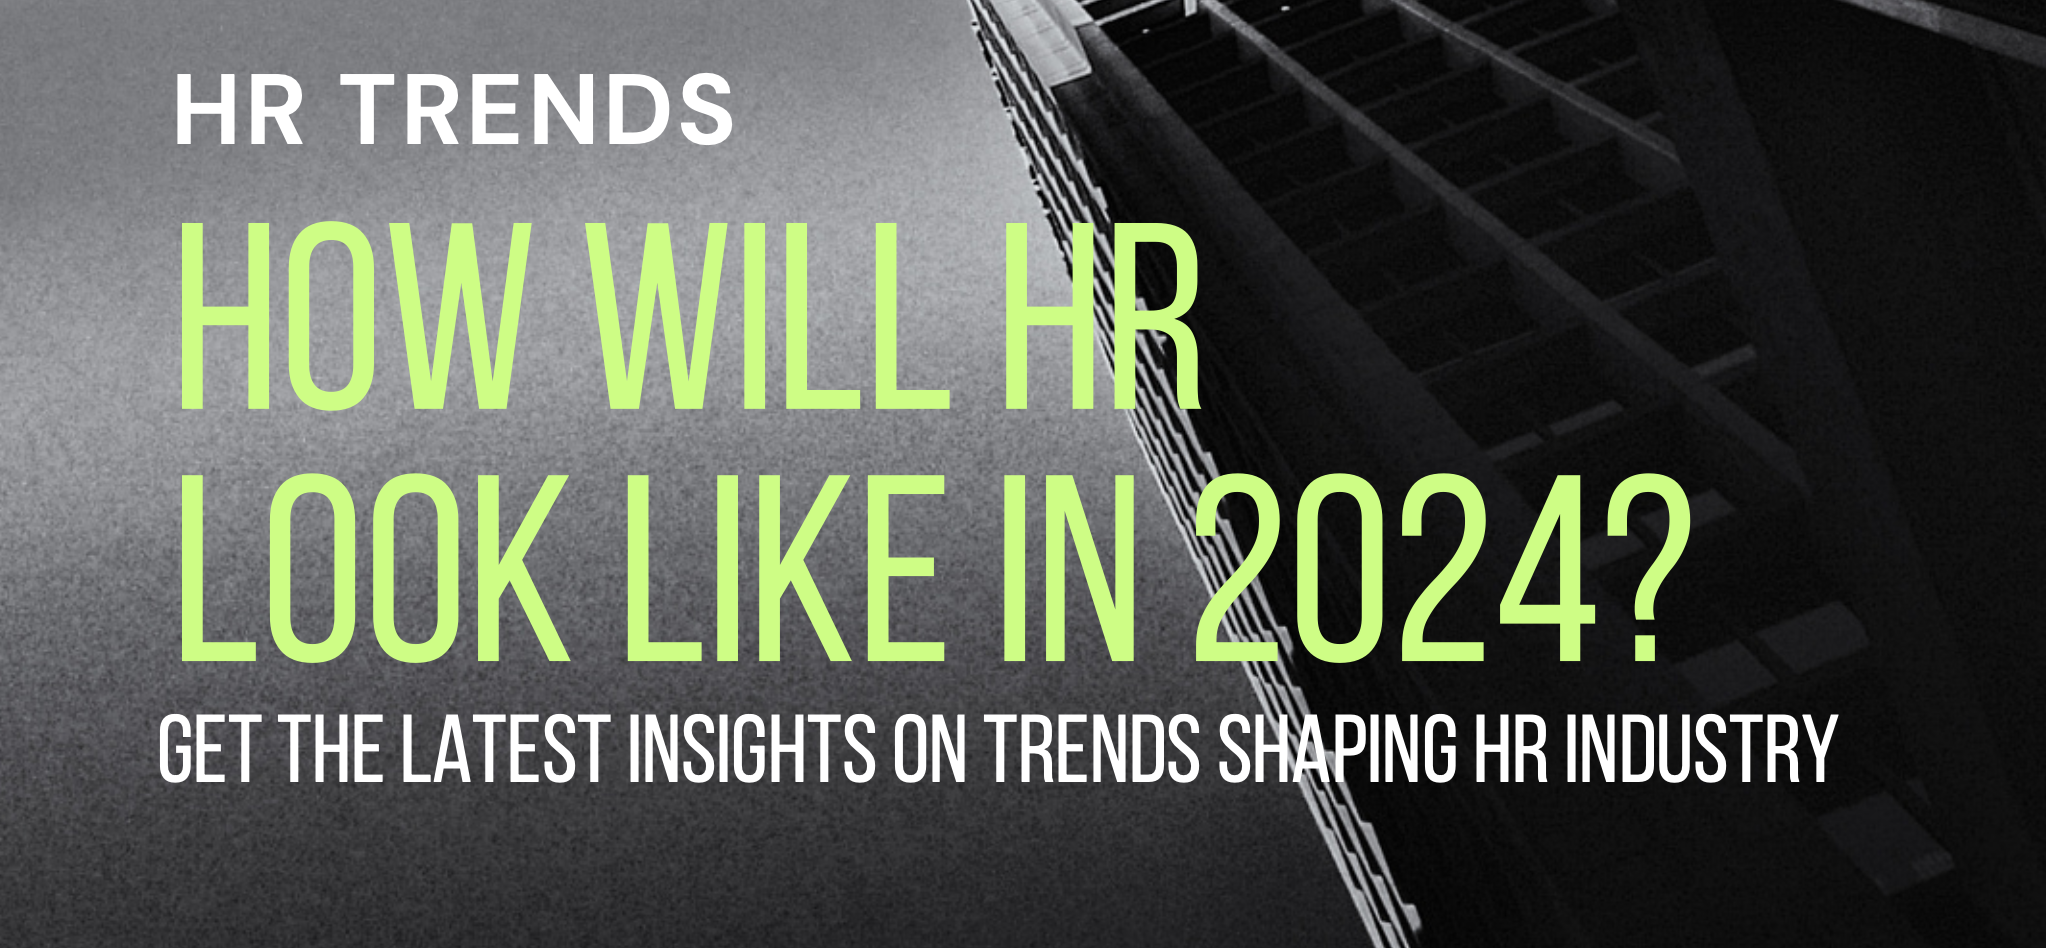 Report: What will HR look like in 2024?